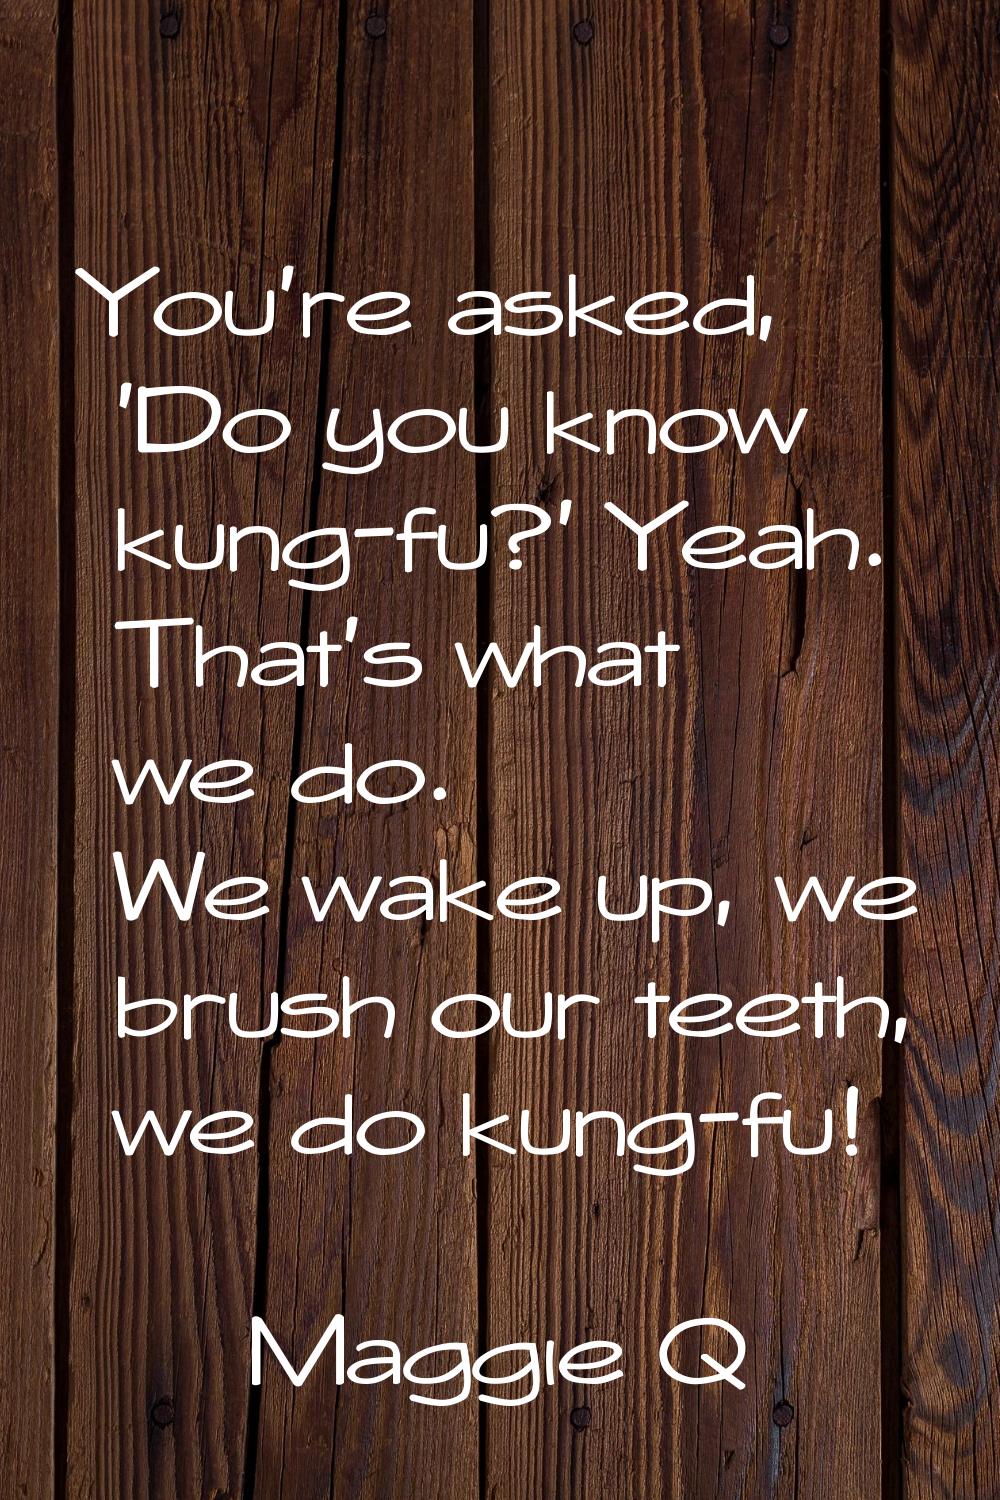 You're asked, 'Do you know kung-fu?' Yeah. That's what we do. We wake up, we brush our teeth, we do